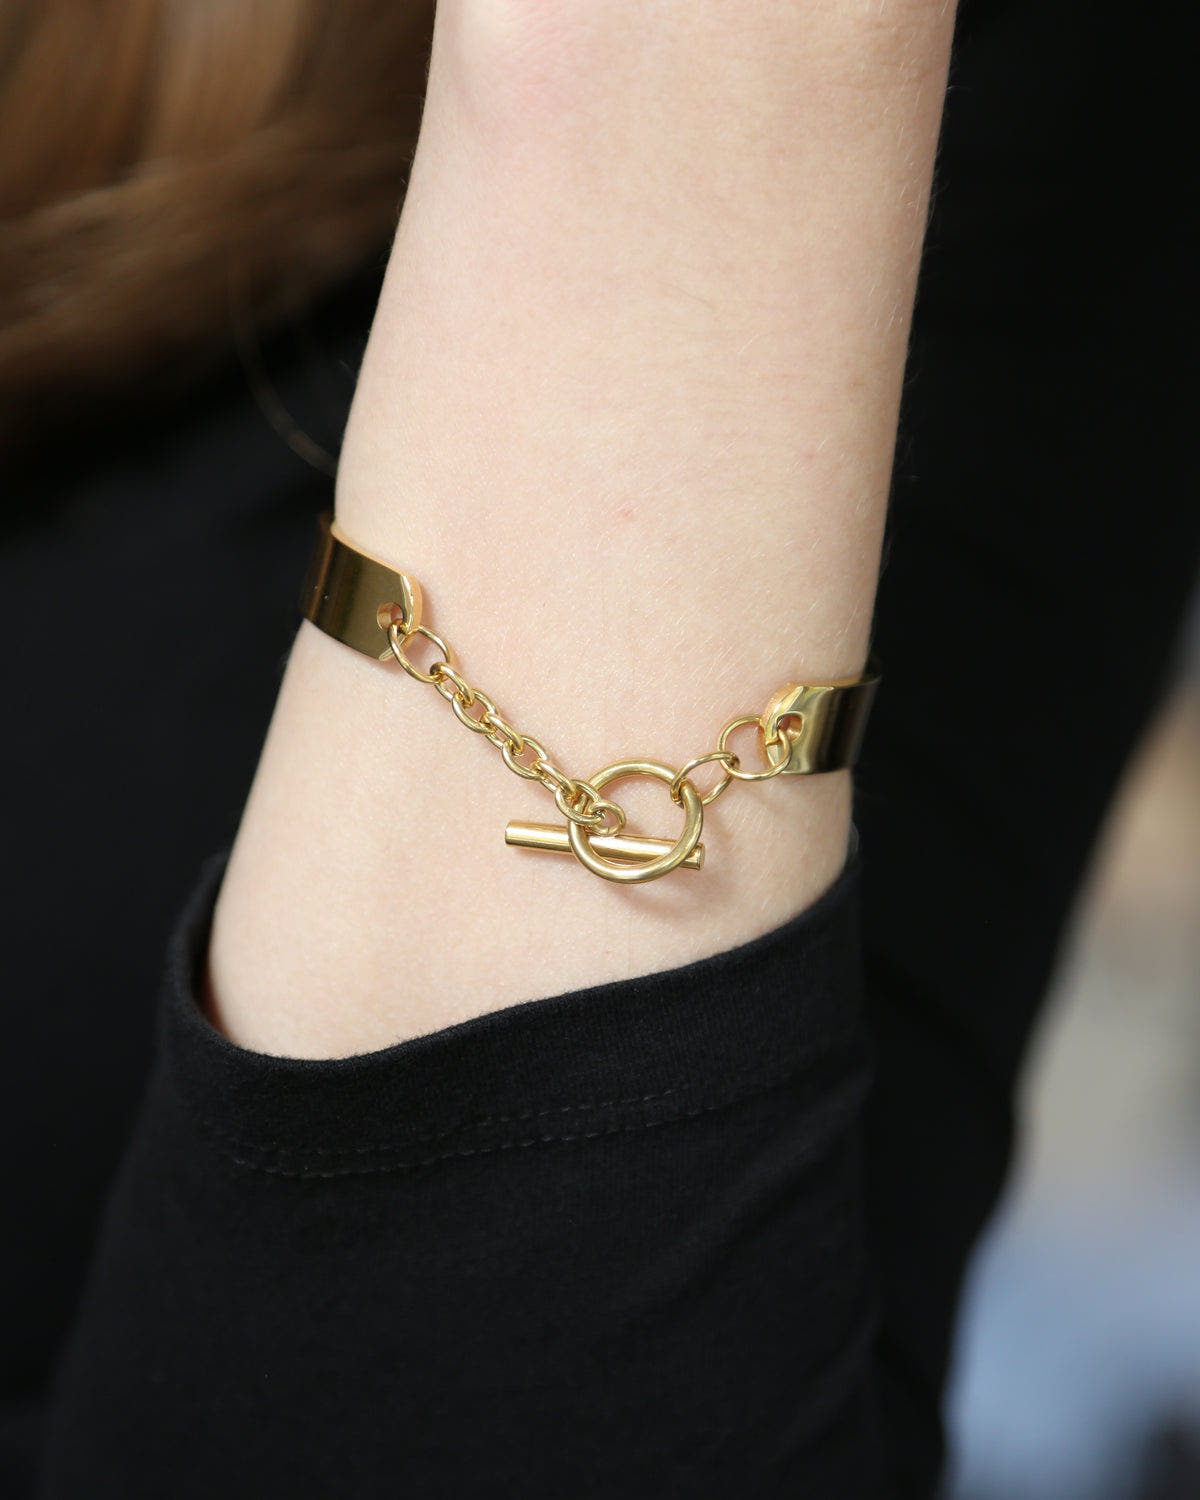 Solid cuff bracelet with chain closure Adjustable bracelet freeshipping - Ollijewelry